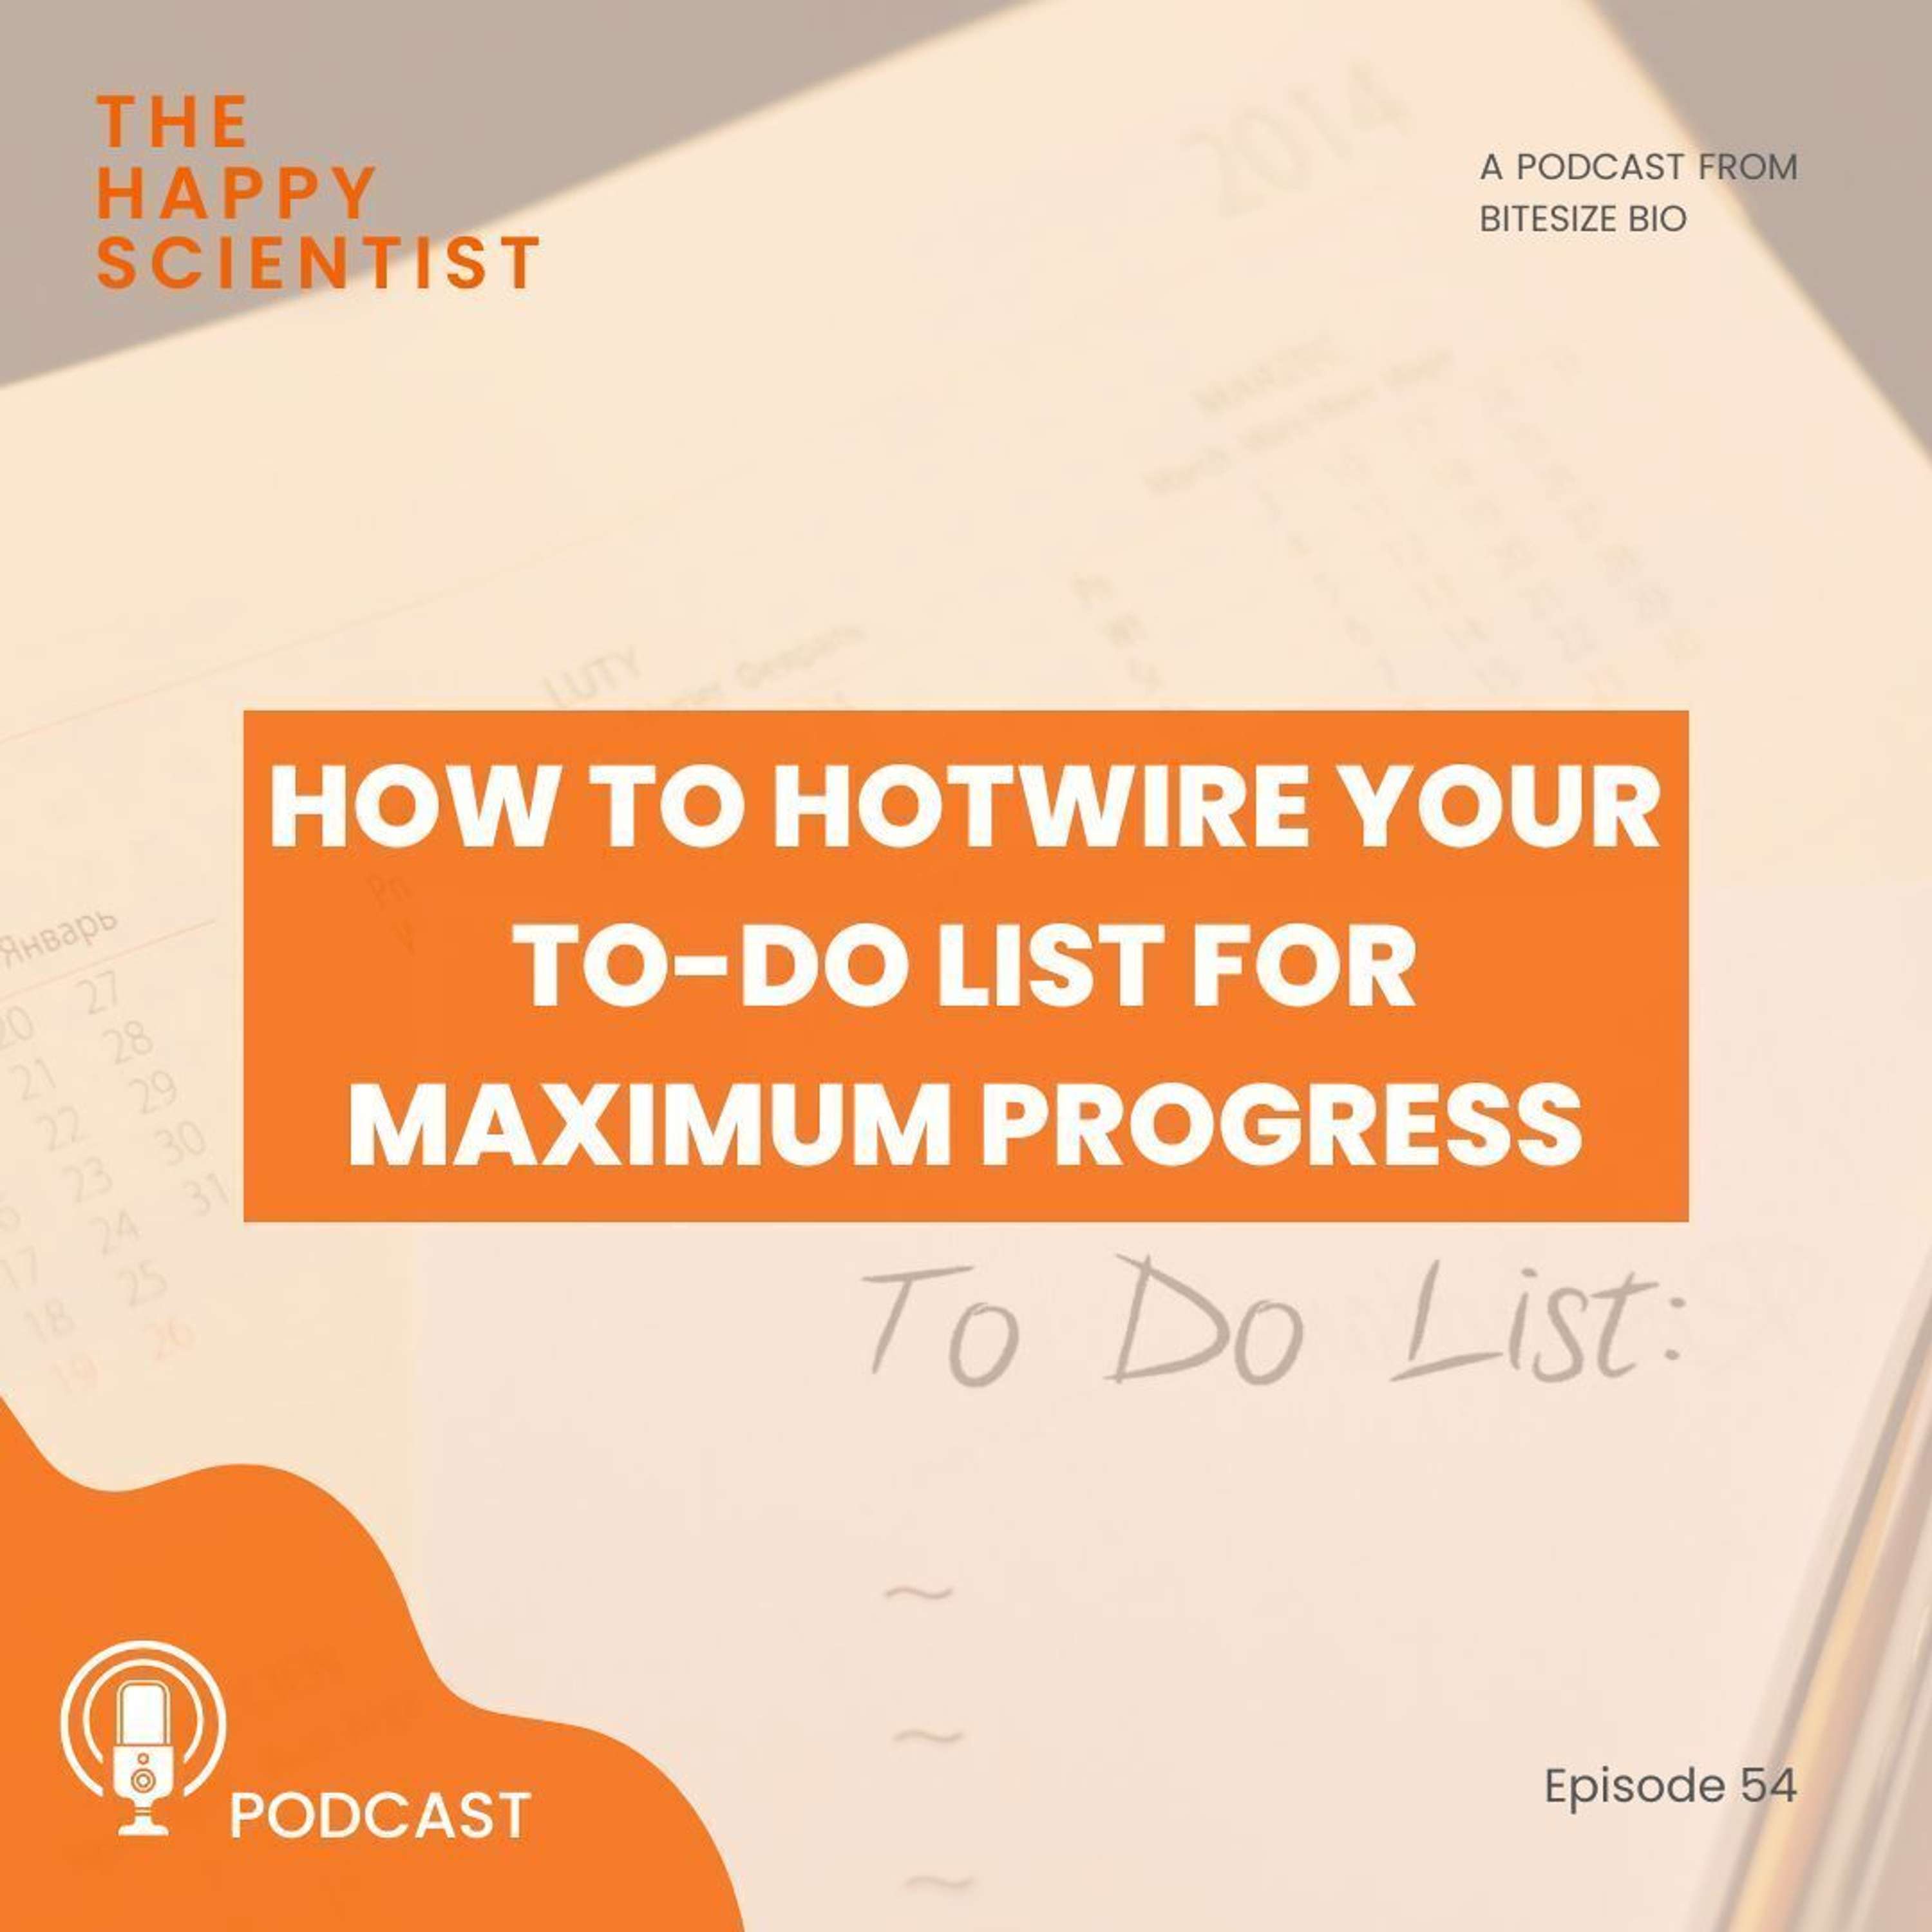 How to Hotwire Your To-do List for Maximum Progress